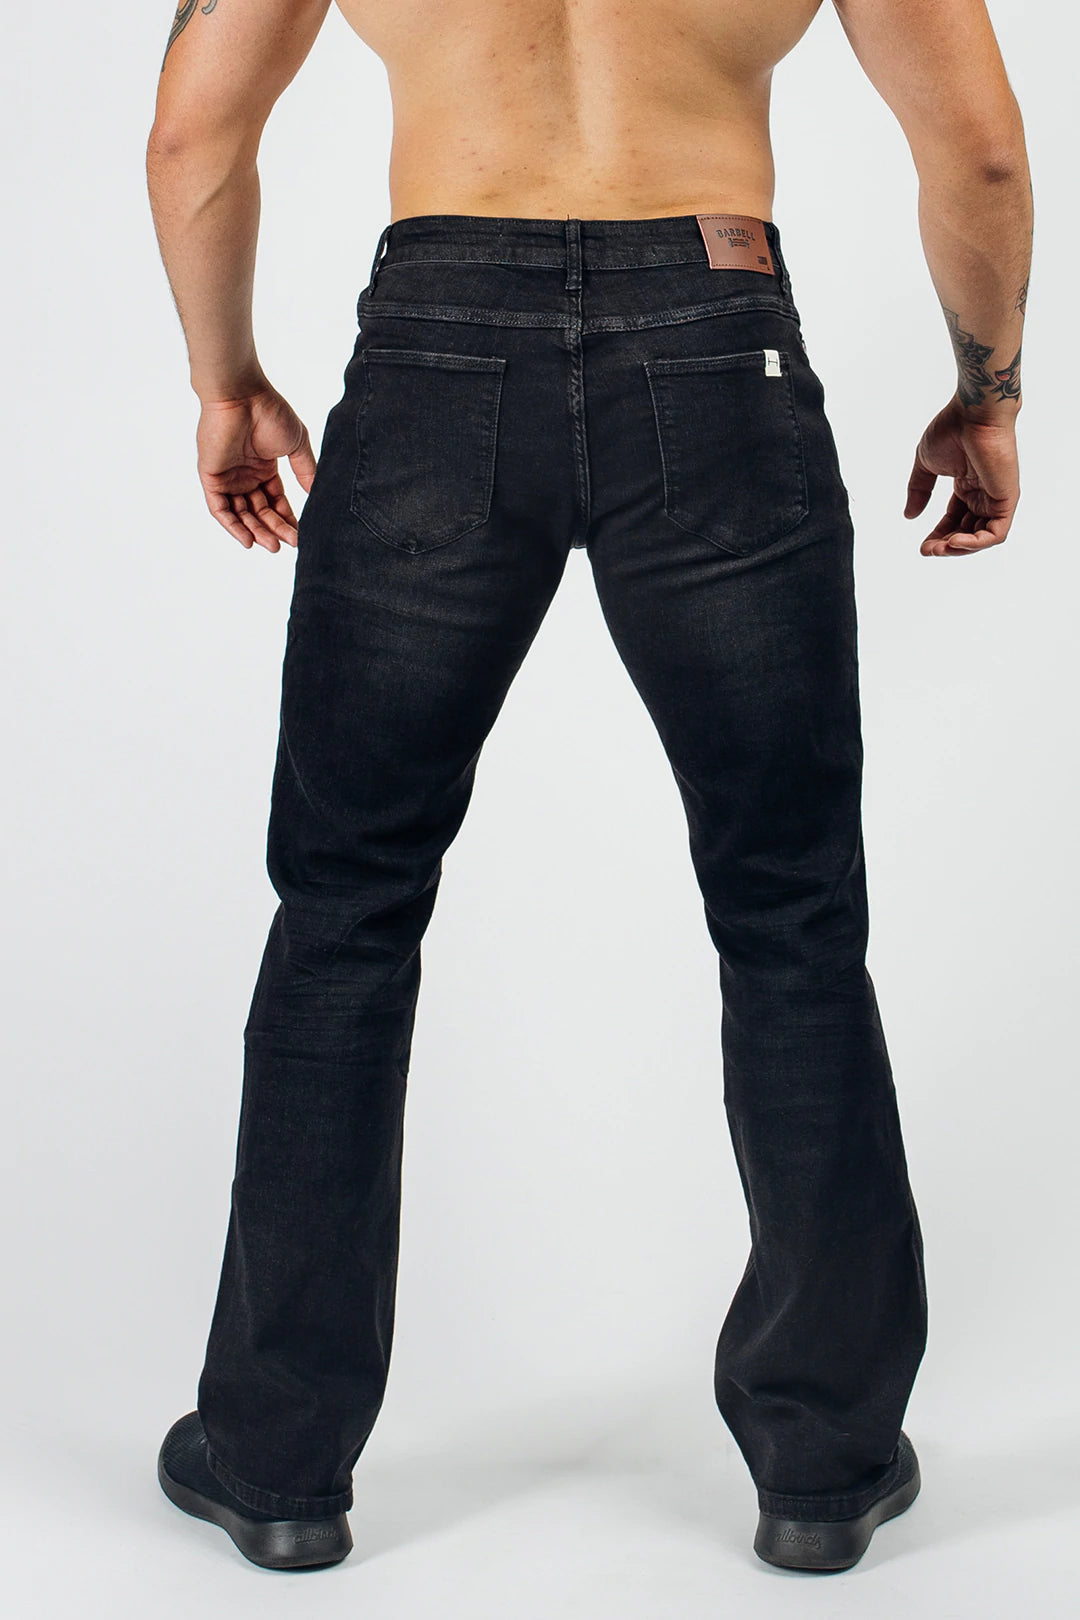 Boot Cut Athletic Fit  - Jet Black - photo from back #color_jet-black